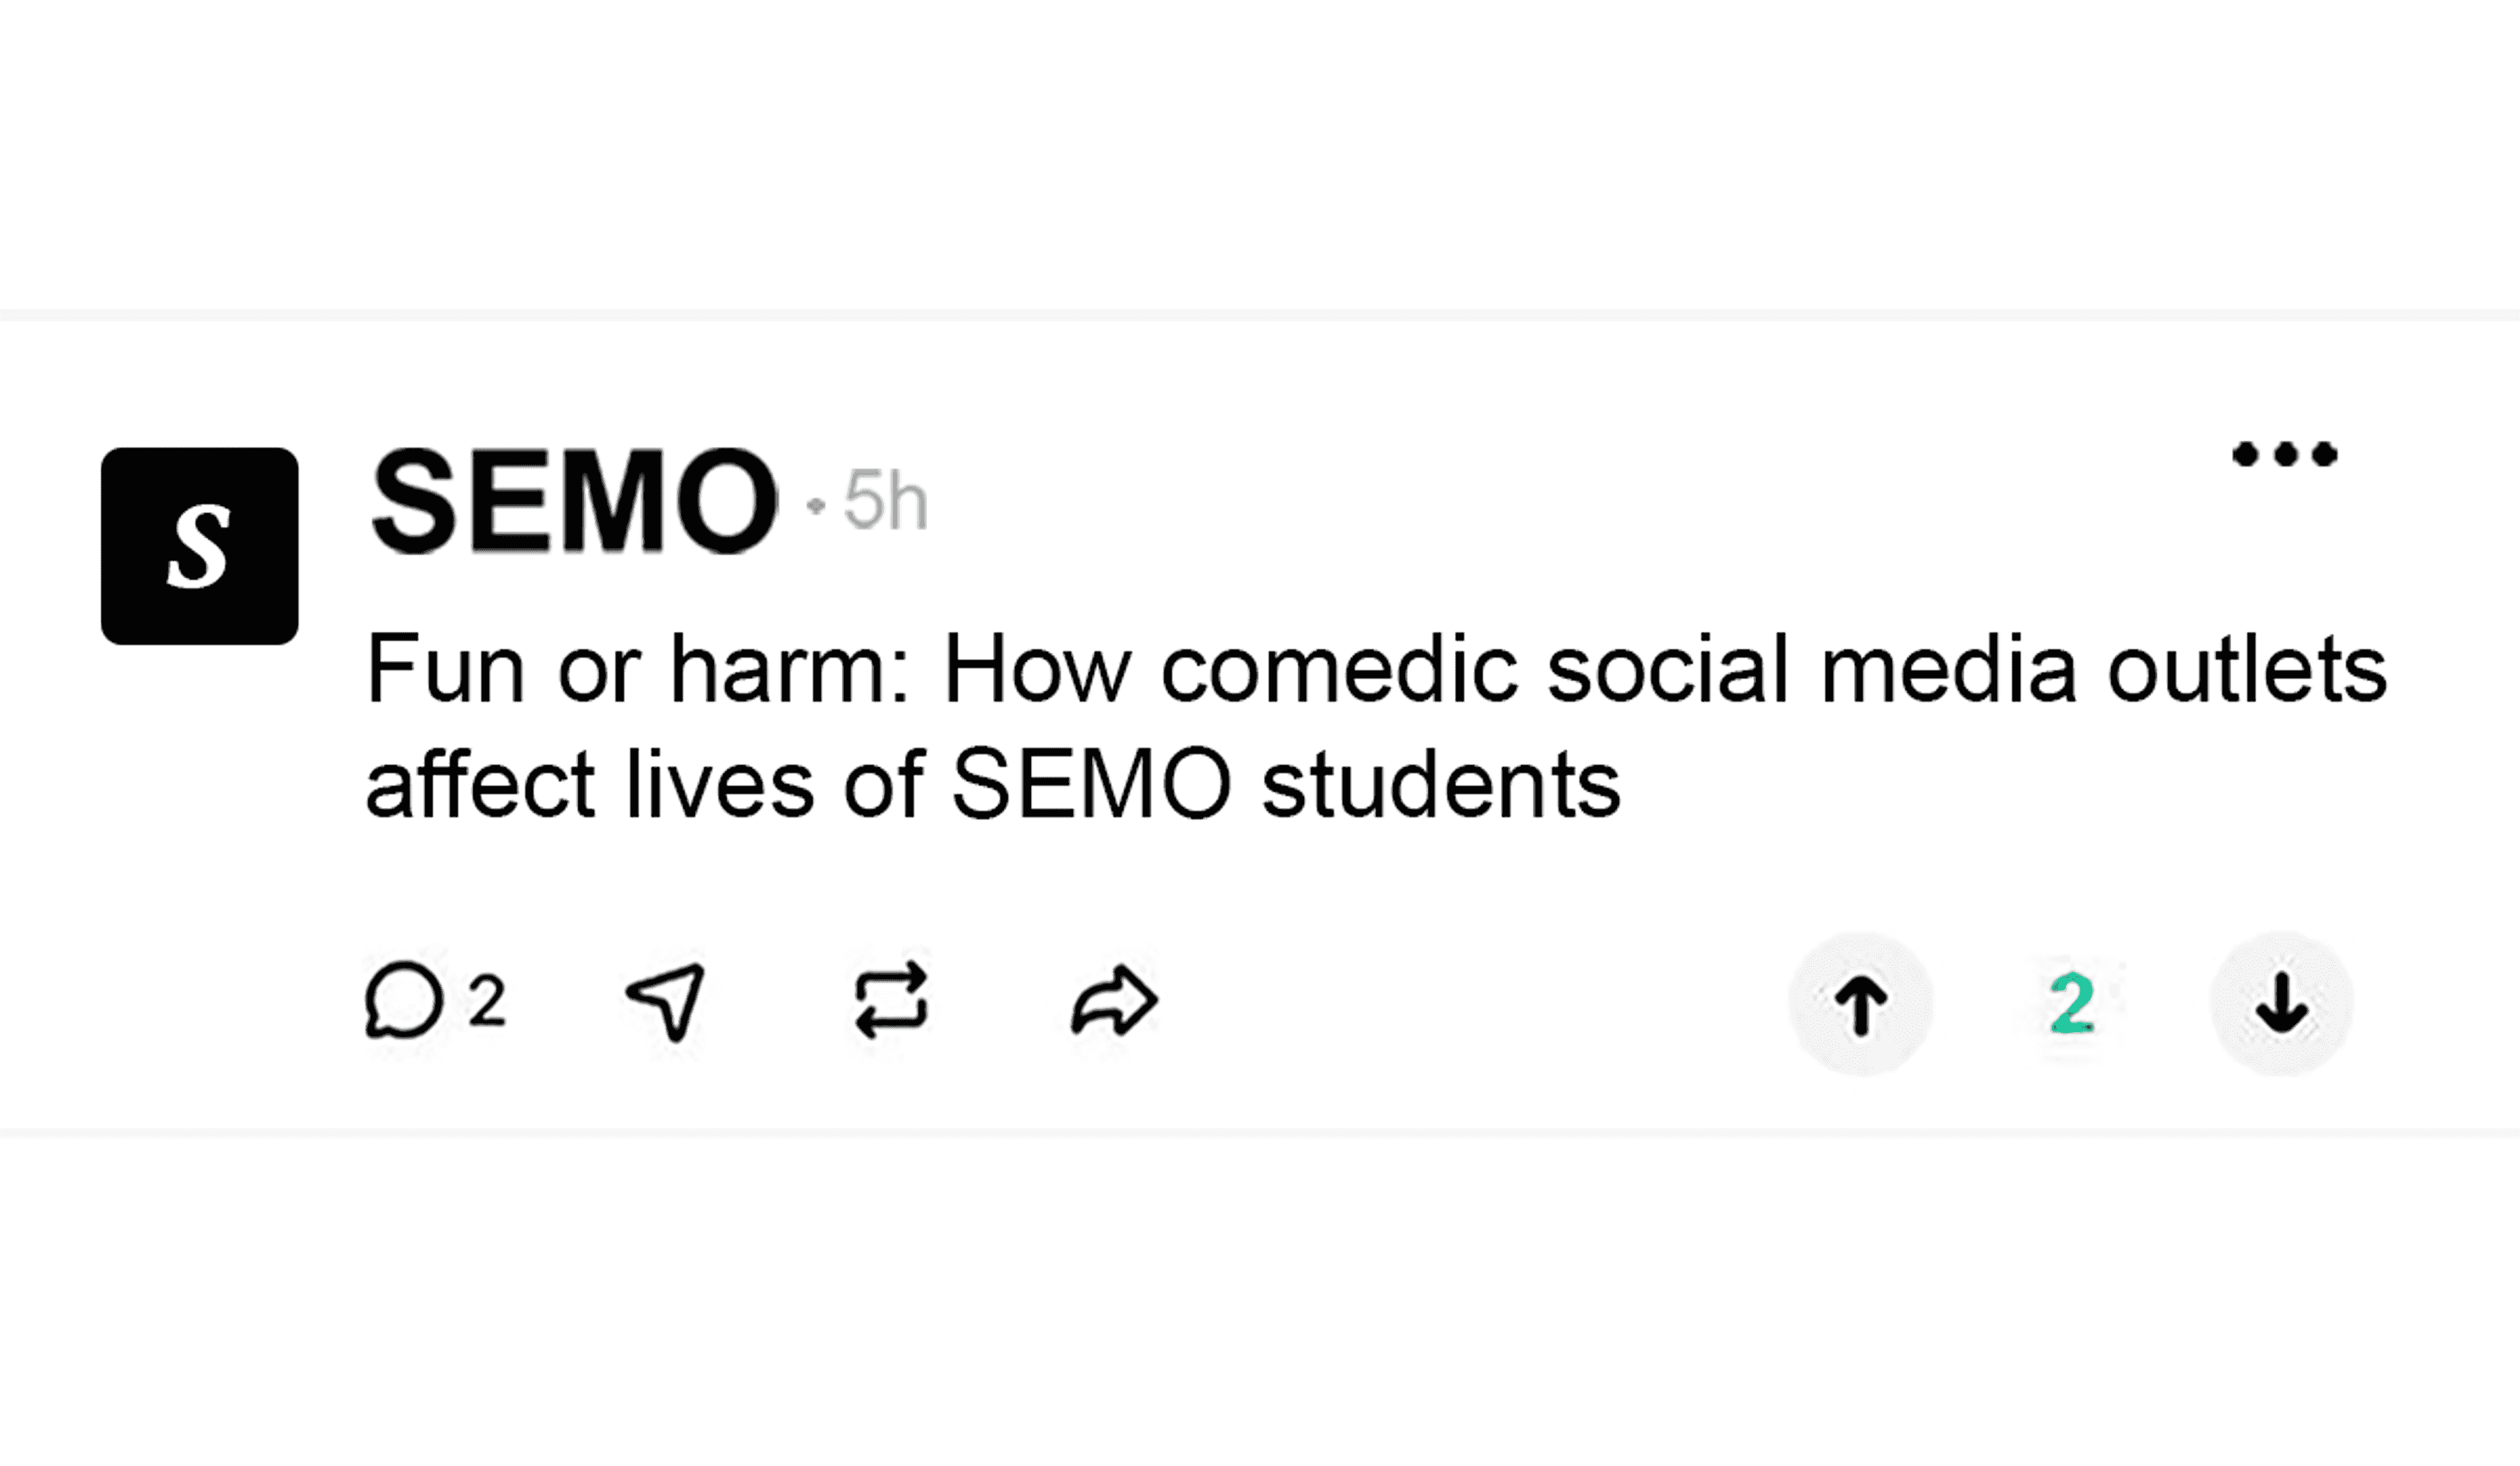 Fun or harm: how comedic social media outlets affect lives of SEMO students